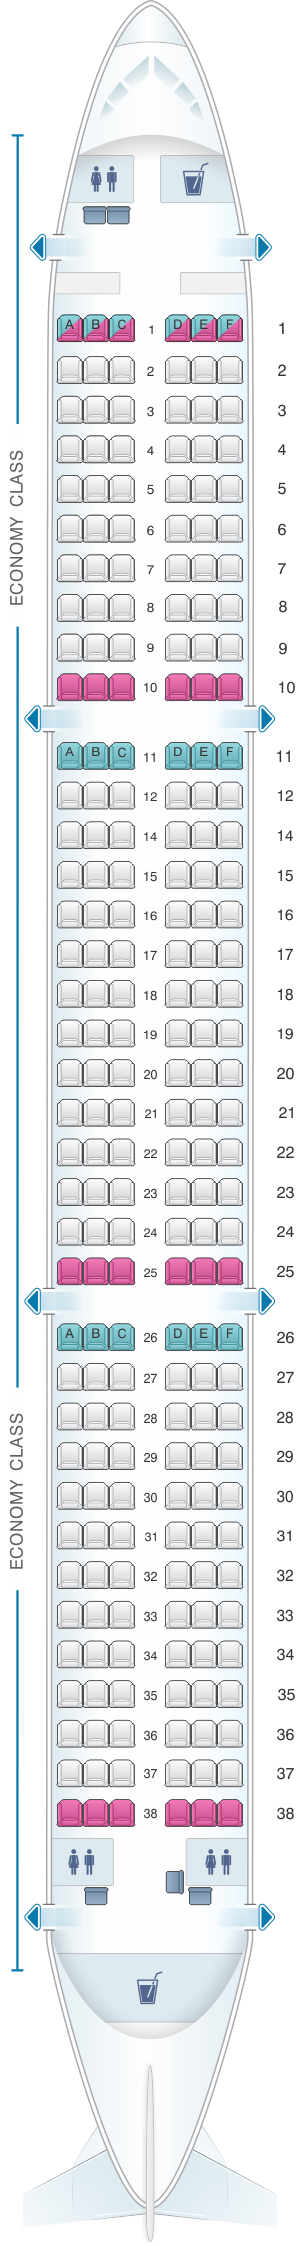 Seat map for Freebird Airlines Airbus A321